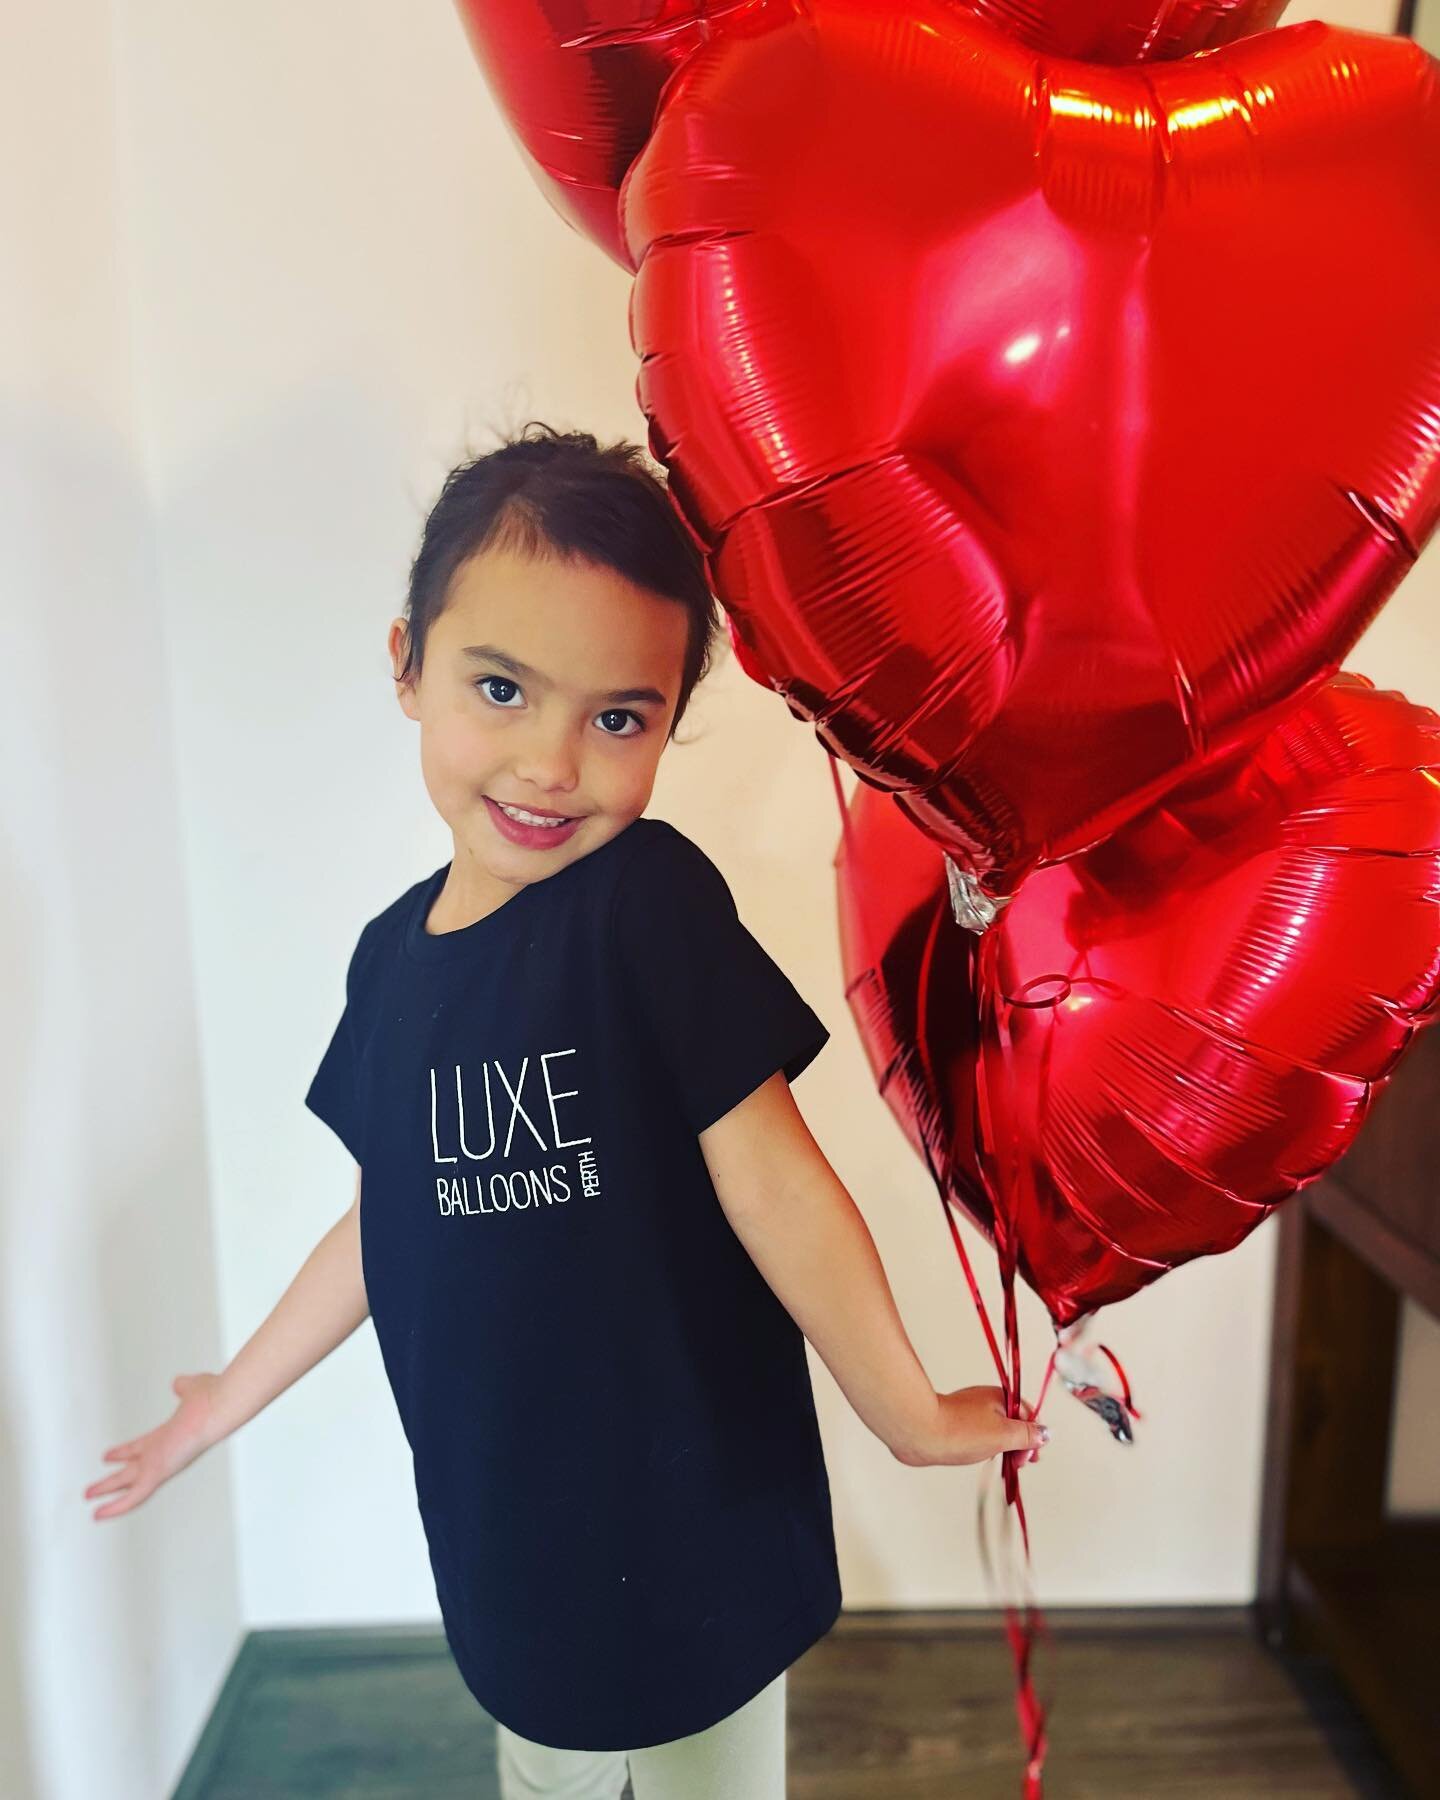 ❤️ Little Miss @luxeballoonsperth  came along for the ride today, grateful to my clients who don&rsquo;t mind my little helper being in tow from time to time .

She was super excited to don her little tee by @ohsweetmerch &amp; a trip her fav place @